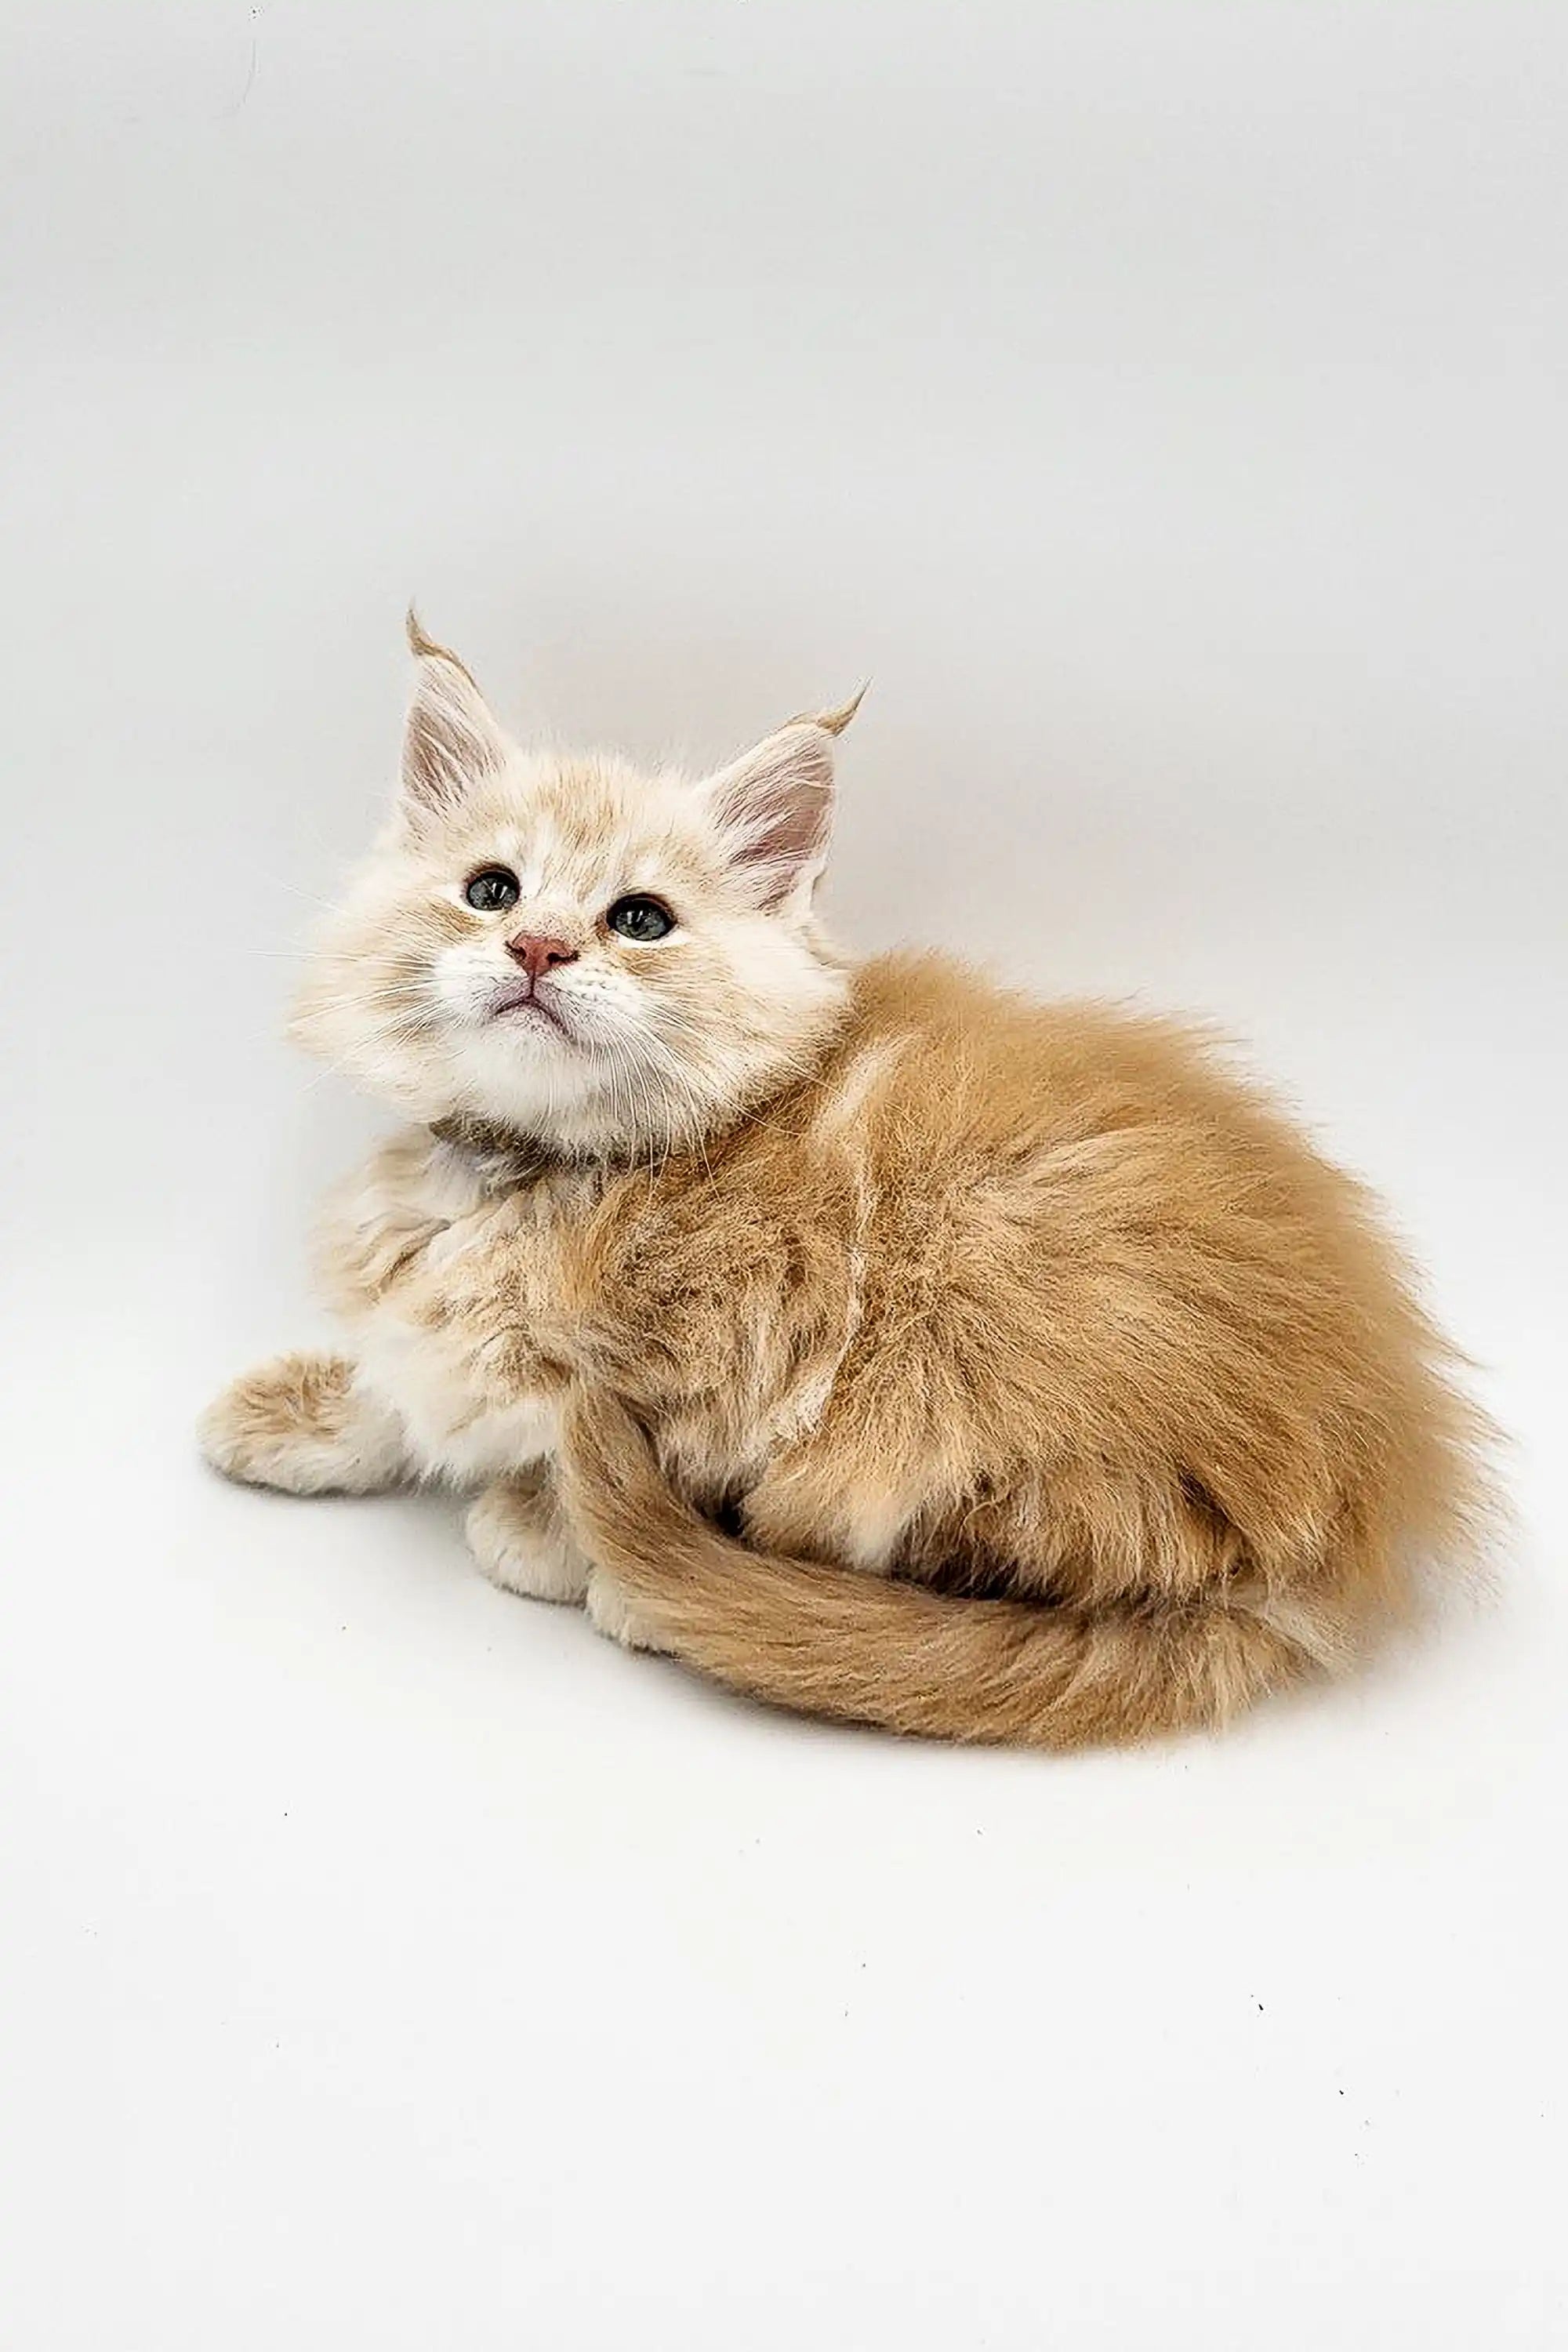 Maine Coon Kittens for Sale Querty | Kitten